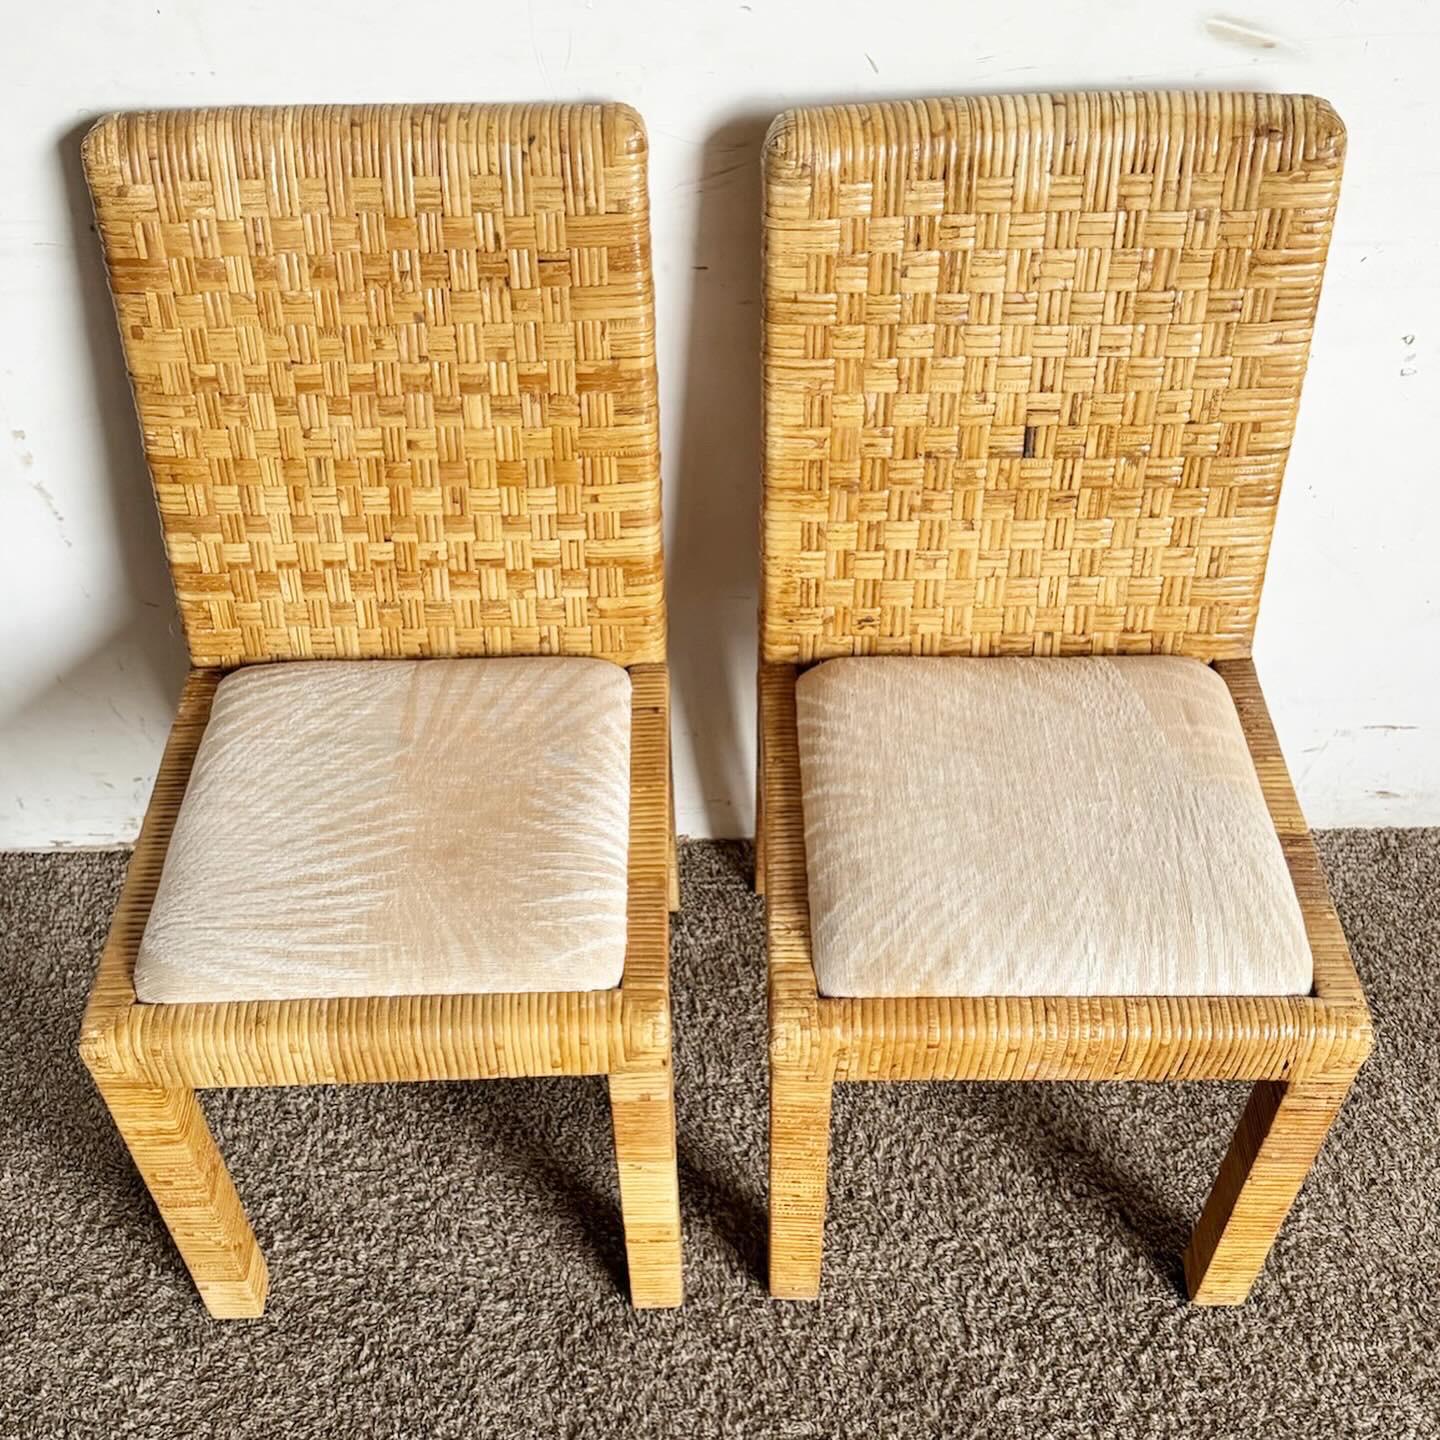 Boho Chic Rattan and Wicker Parsons Dining Chairs - Set of 4 In Good Condition For Sale In Delray Beach, FL